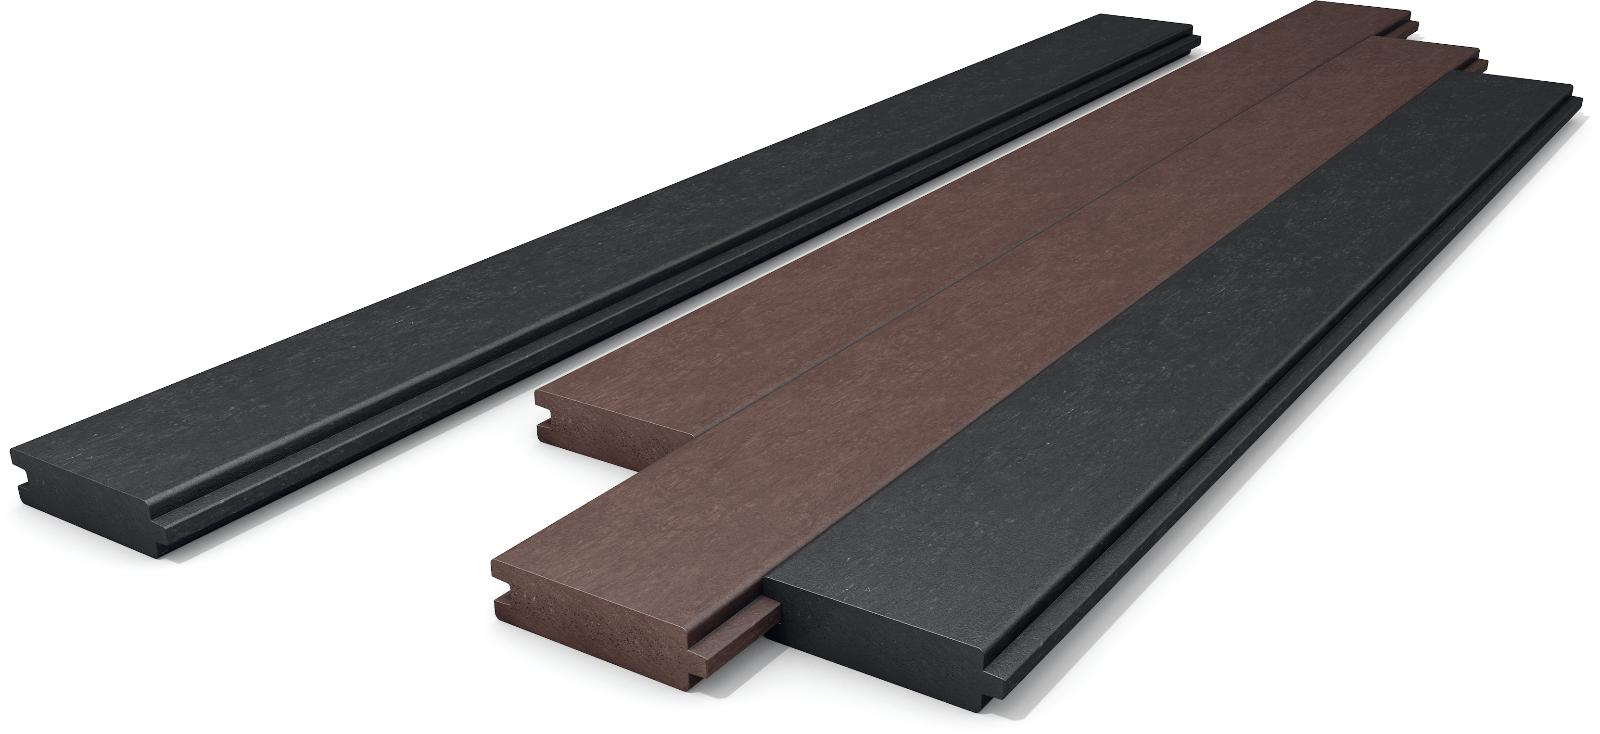 hanit ULTRA Board profile | tongue and groove